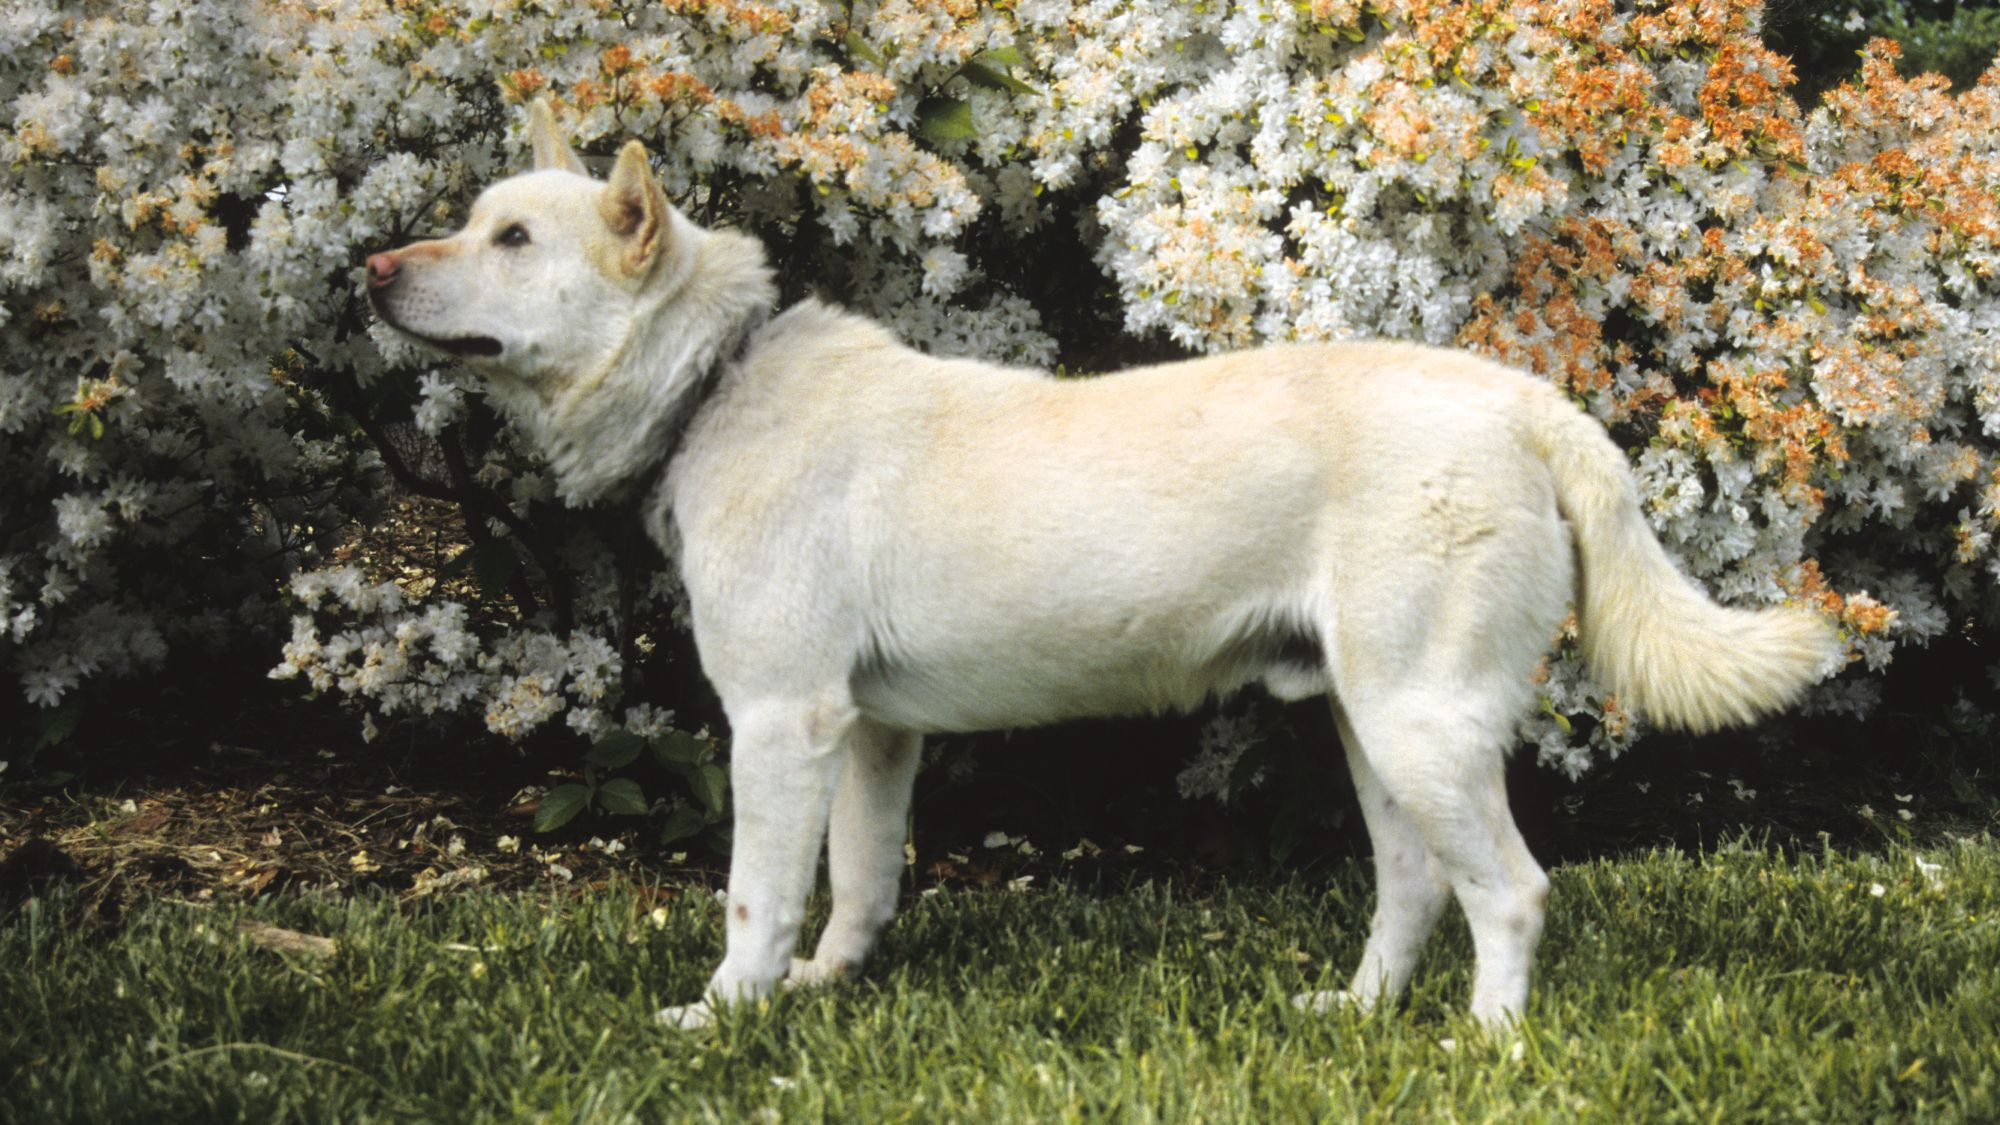 Korean Jingo Dog stood to the side in front of a flowering bush